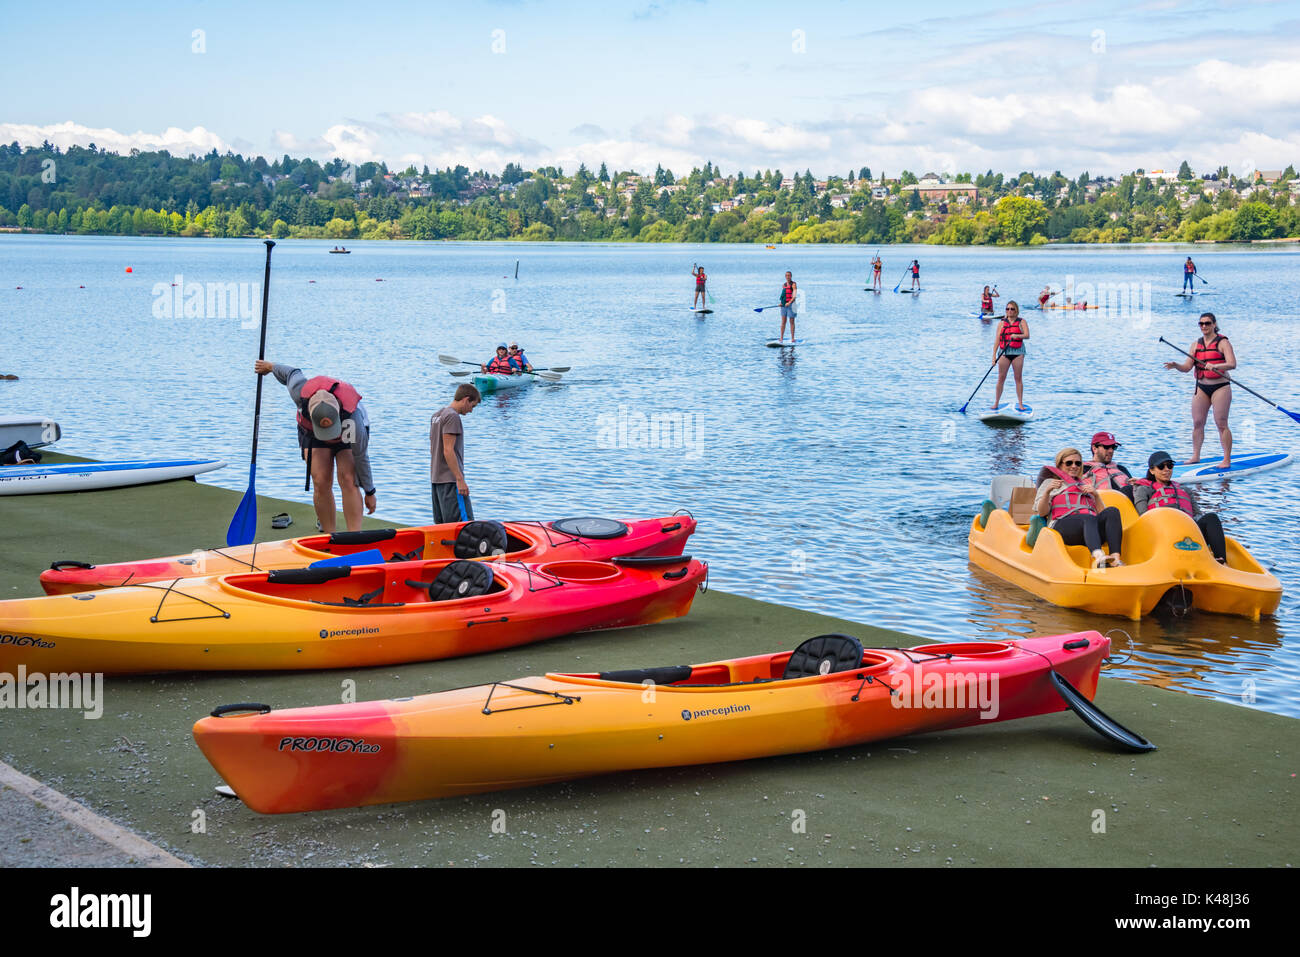 Family Boating and Stand Up Paddle Boarding at Green Lake City Park Seattle Washington Stock Photo